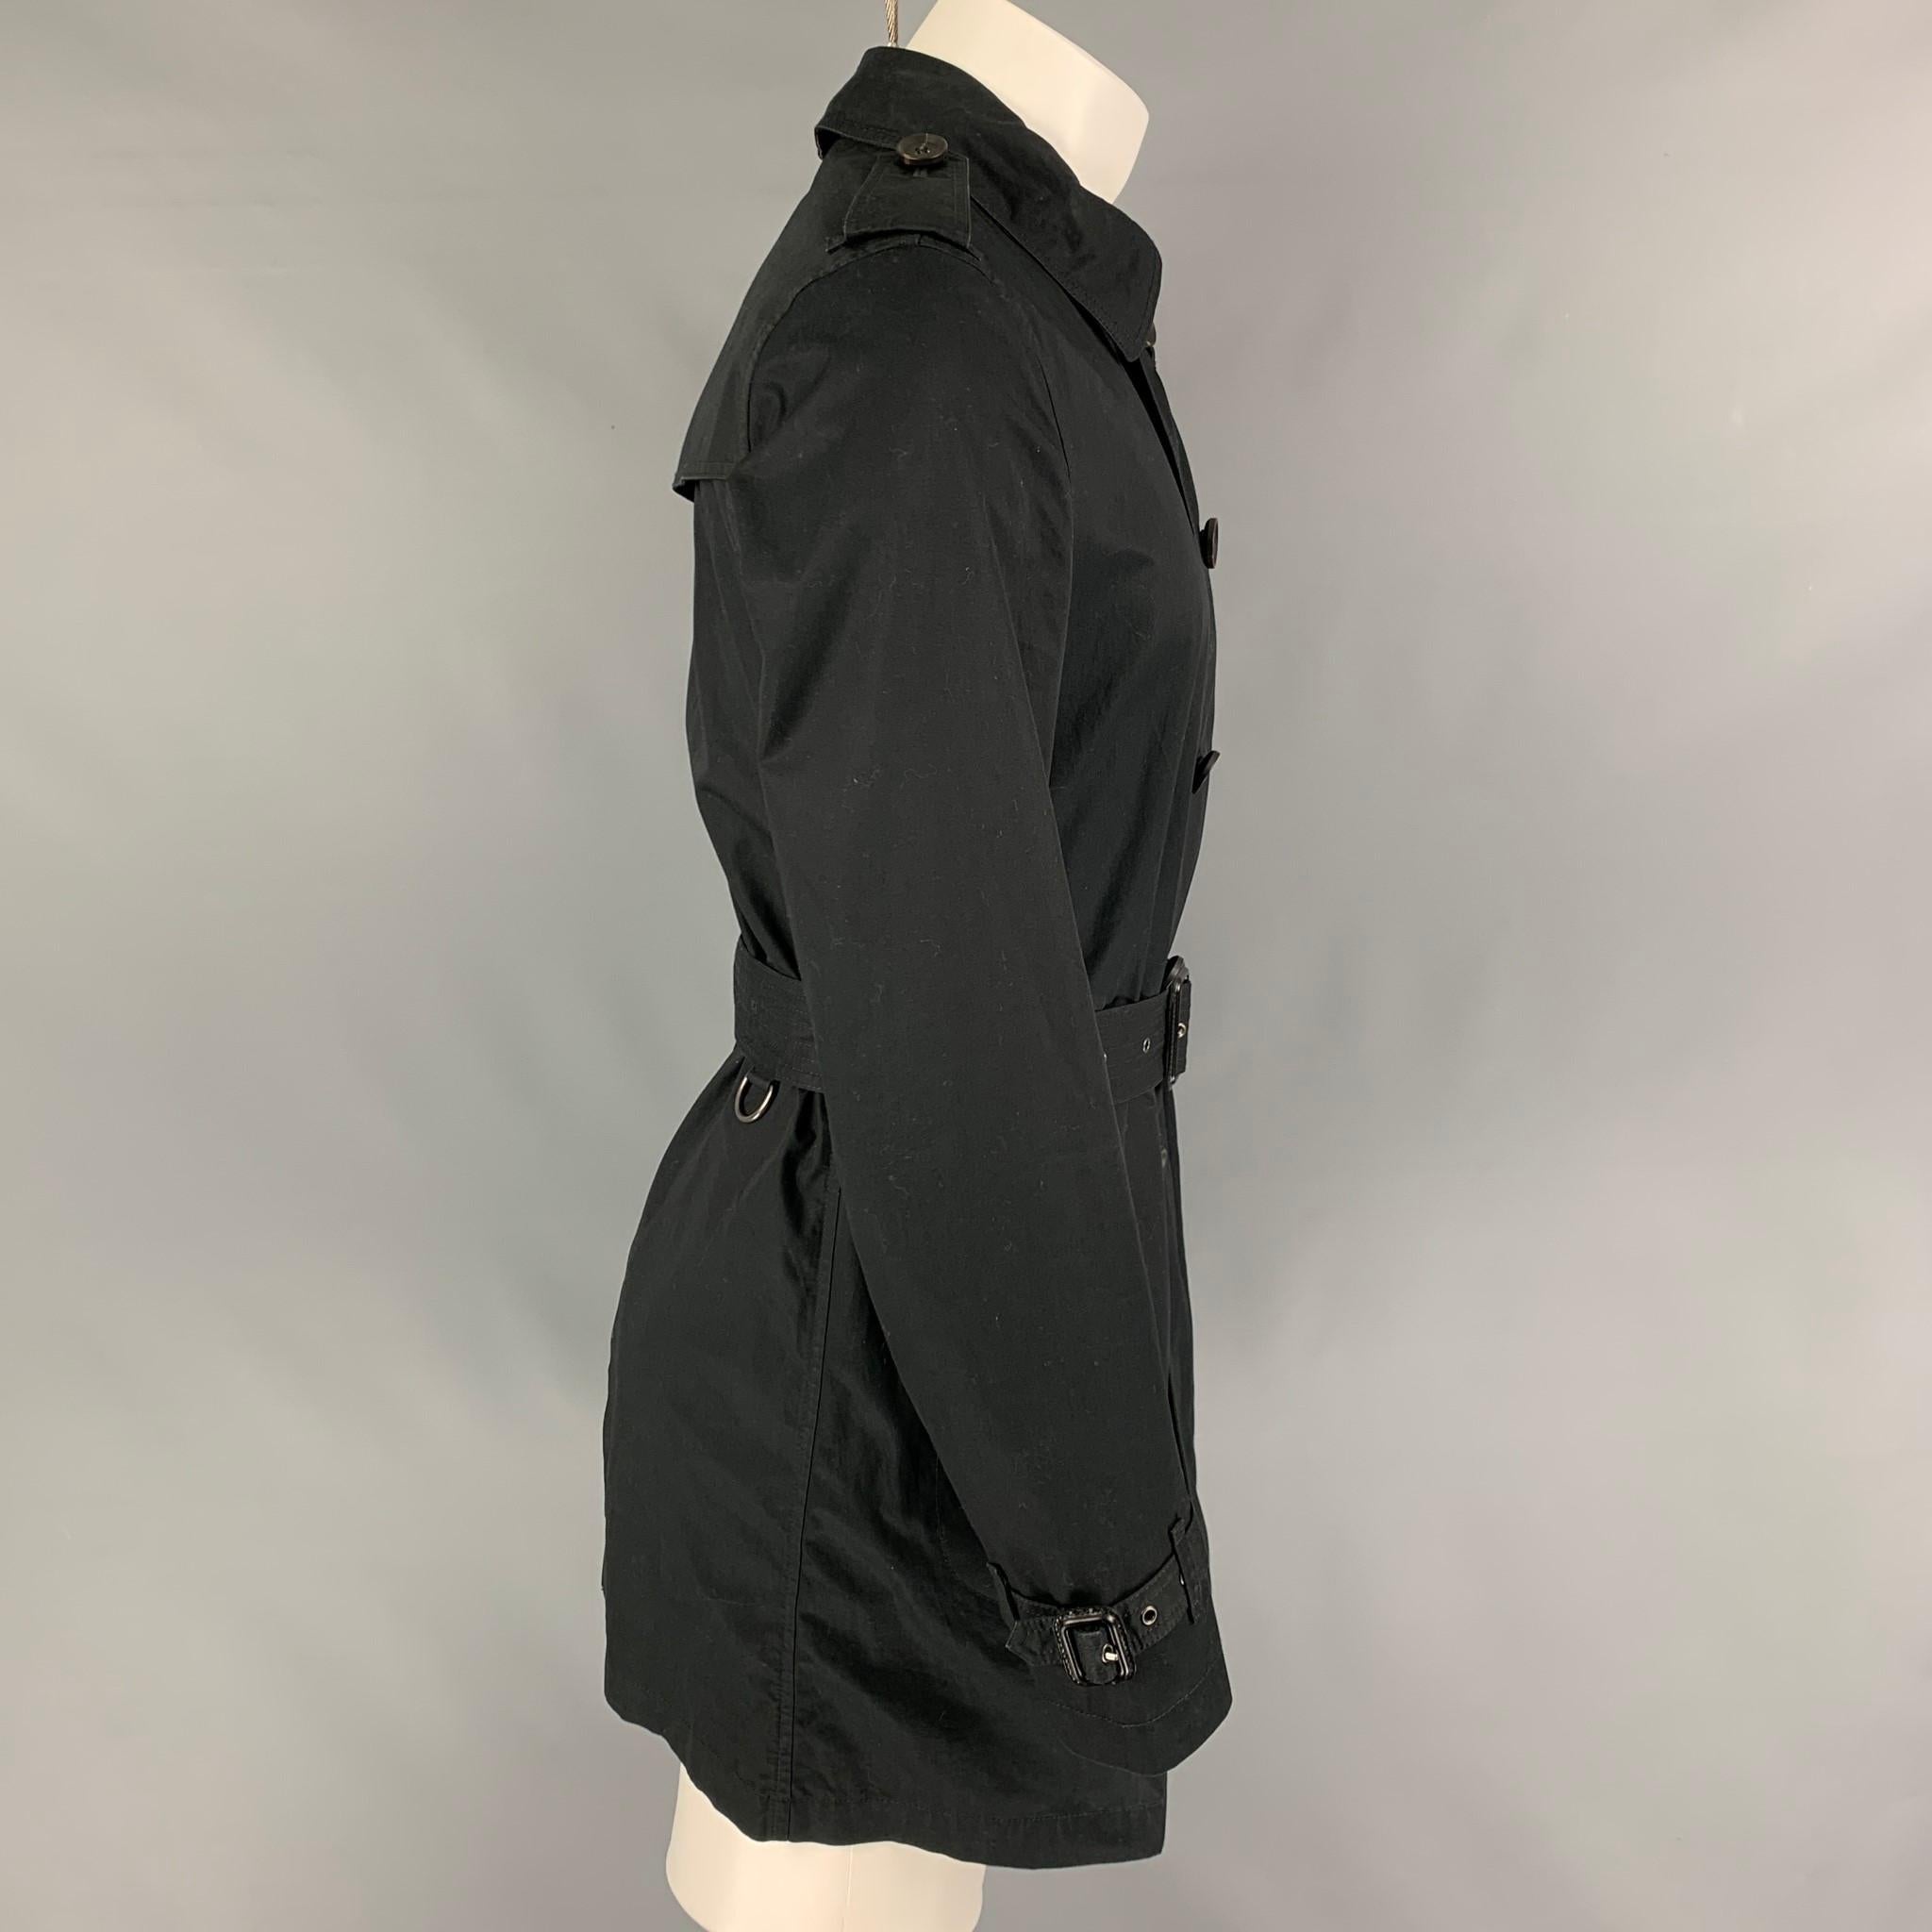 BURBERRY BRIT trench coat comes in a black cotton with a plaid liner featuring a belted style, epaulettes, front pockets, spread collar, and a zip up closure. 

Very Good Pre-Owned Condition.
Marked: S

Measurements:

Shoulder: 17.5 in.
Chest: 38